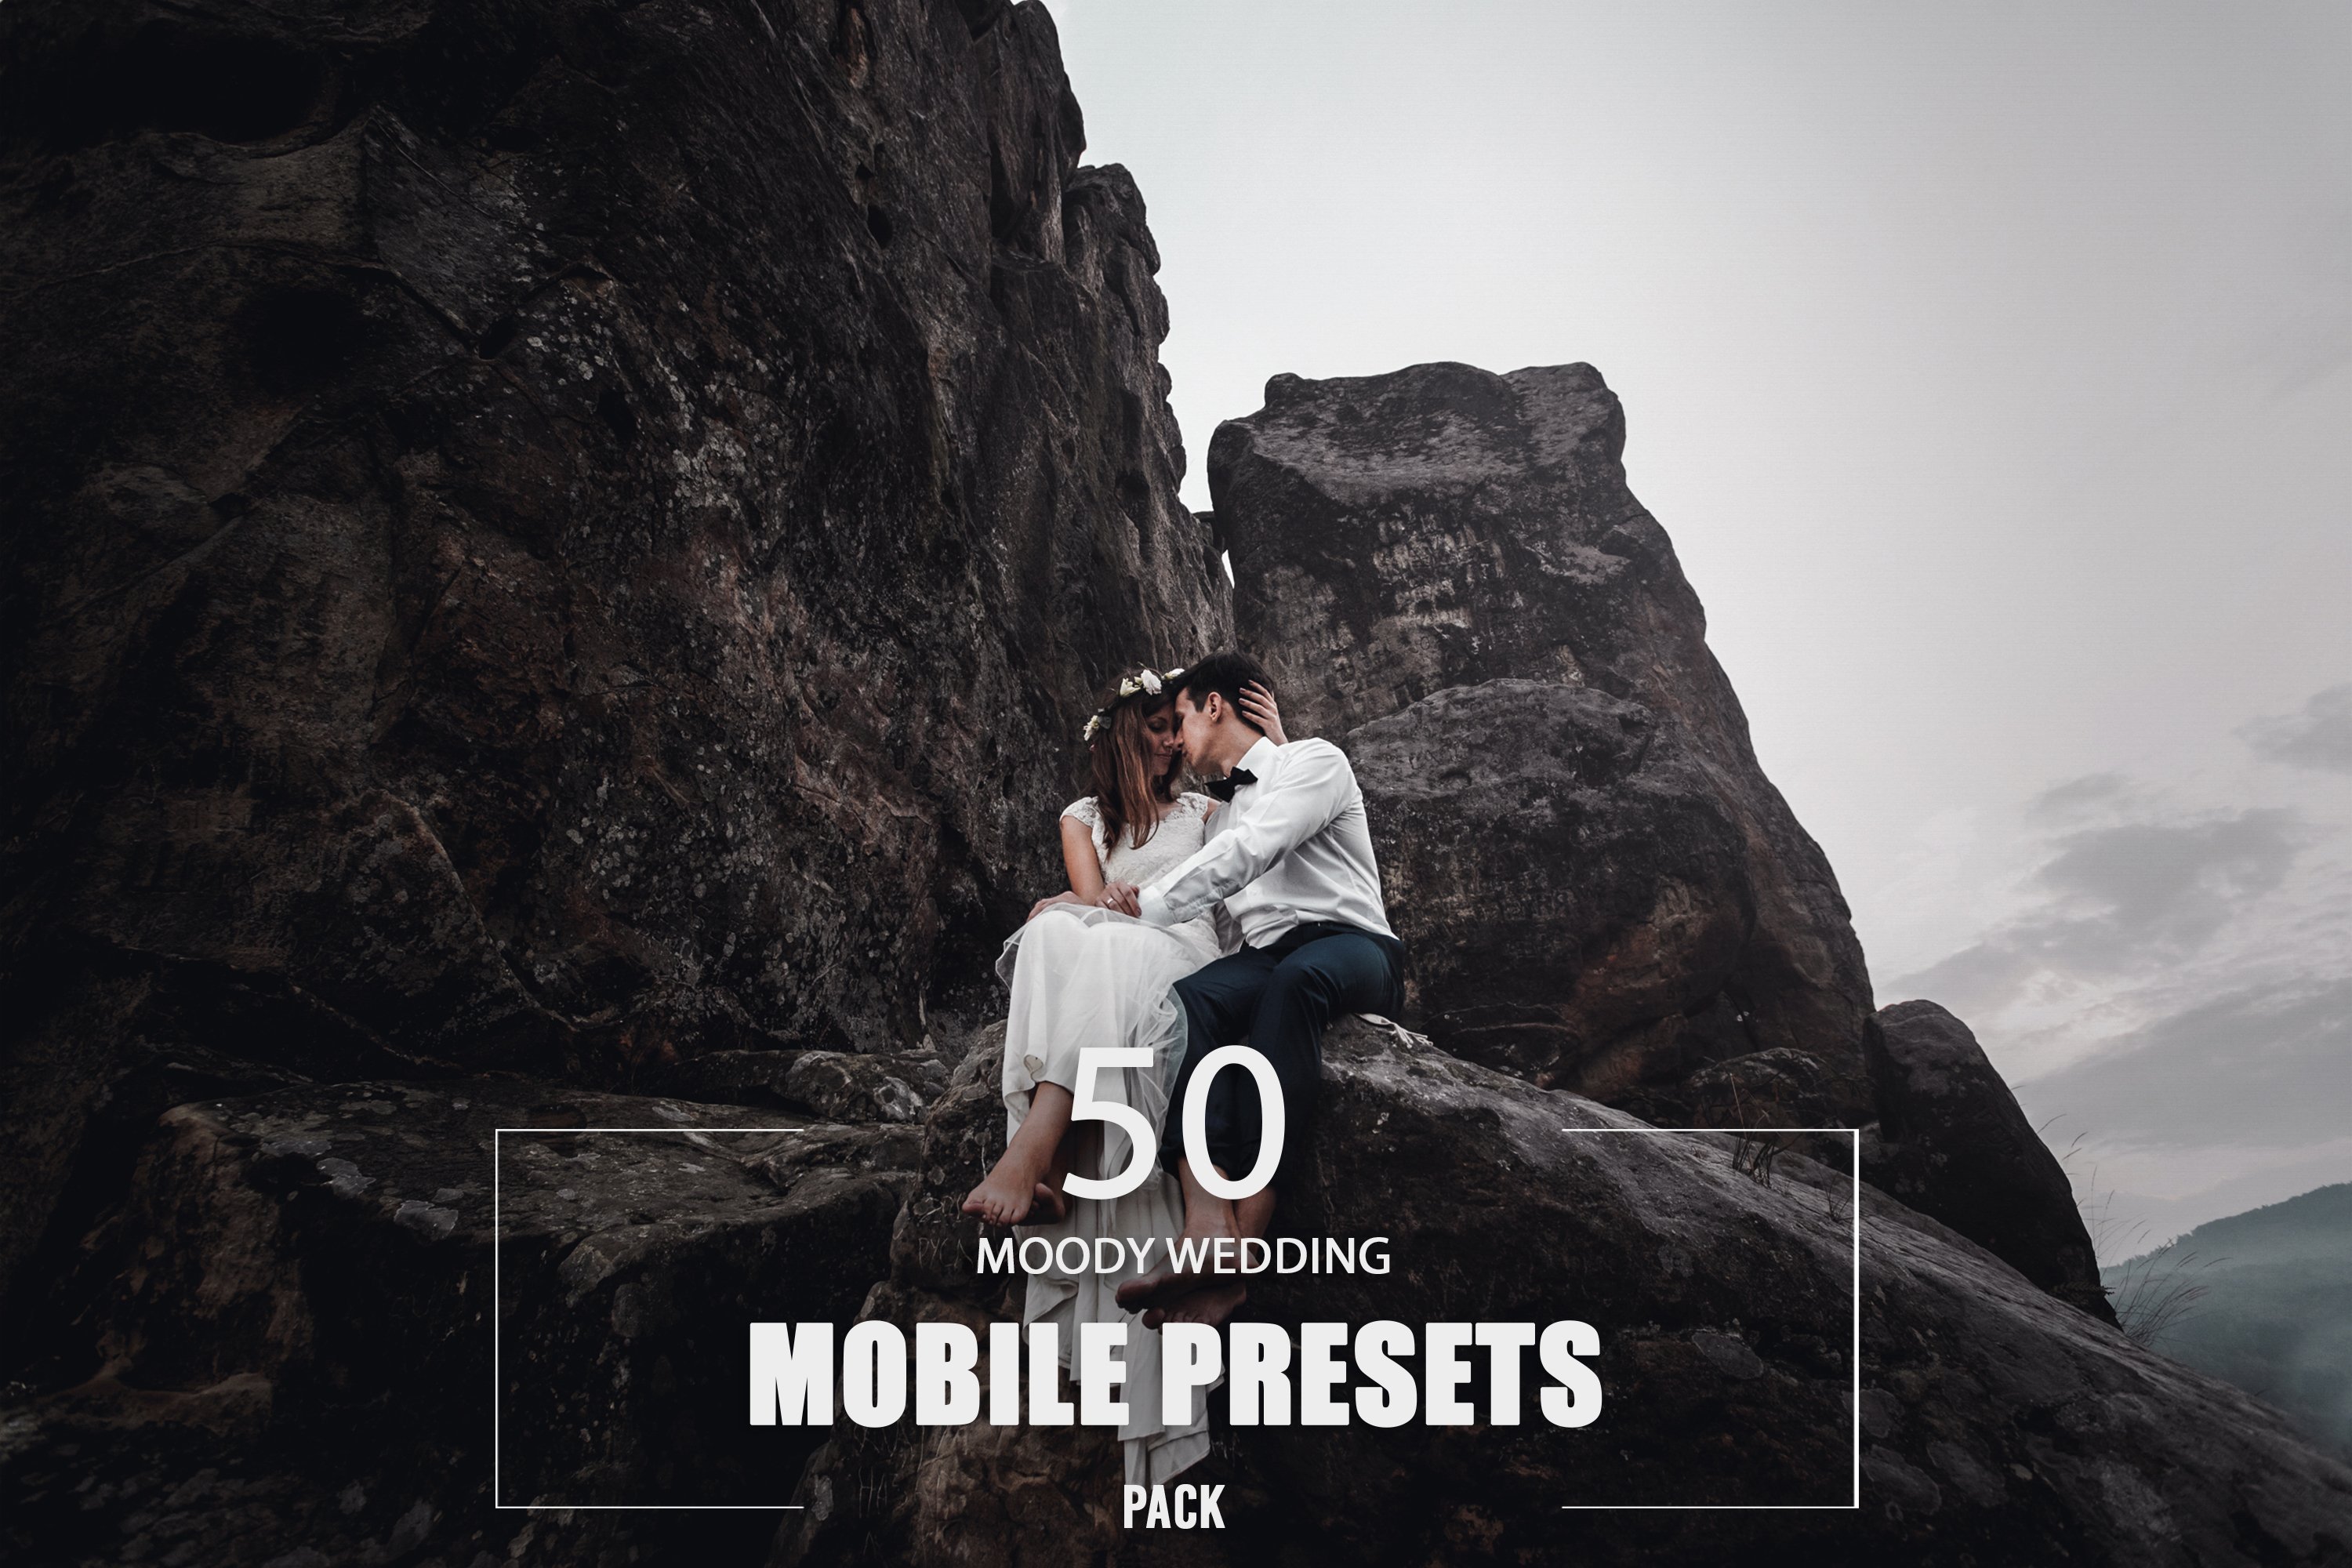 50 Moody Wedding Mobile Presets Packcover image.